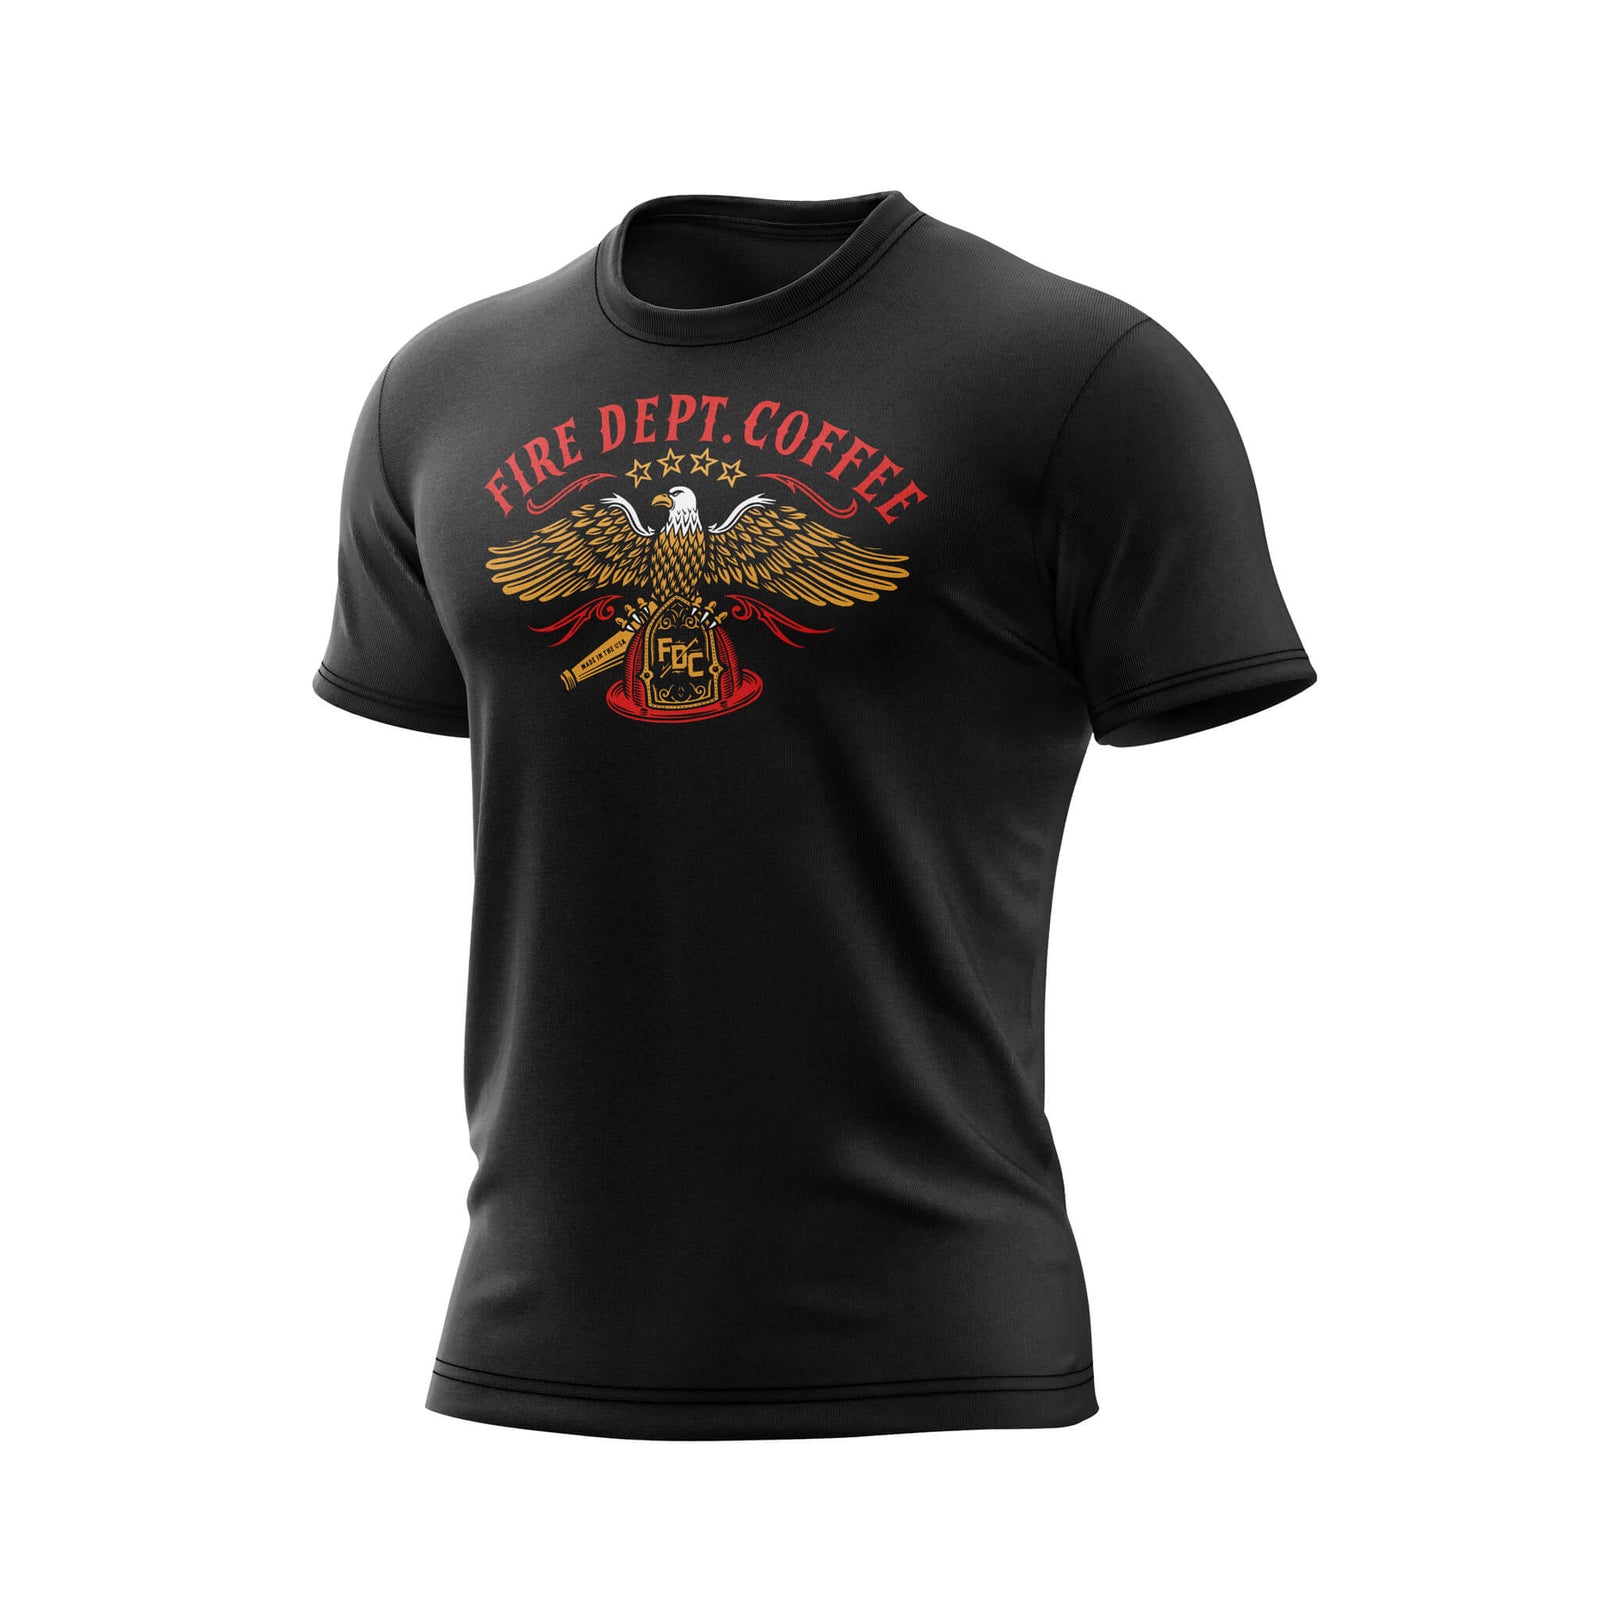 The front side of a black t shirt. On the chest of the t shirt is an eagle holding an FDC fire helmet. Above the eagle is text that reads "Fire Dept. Coffee"